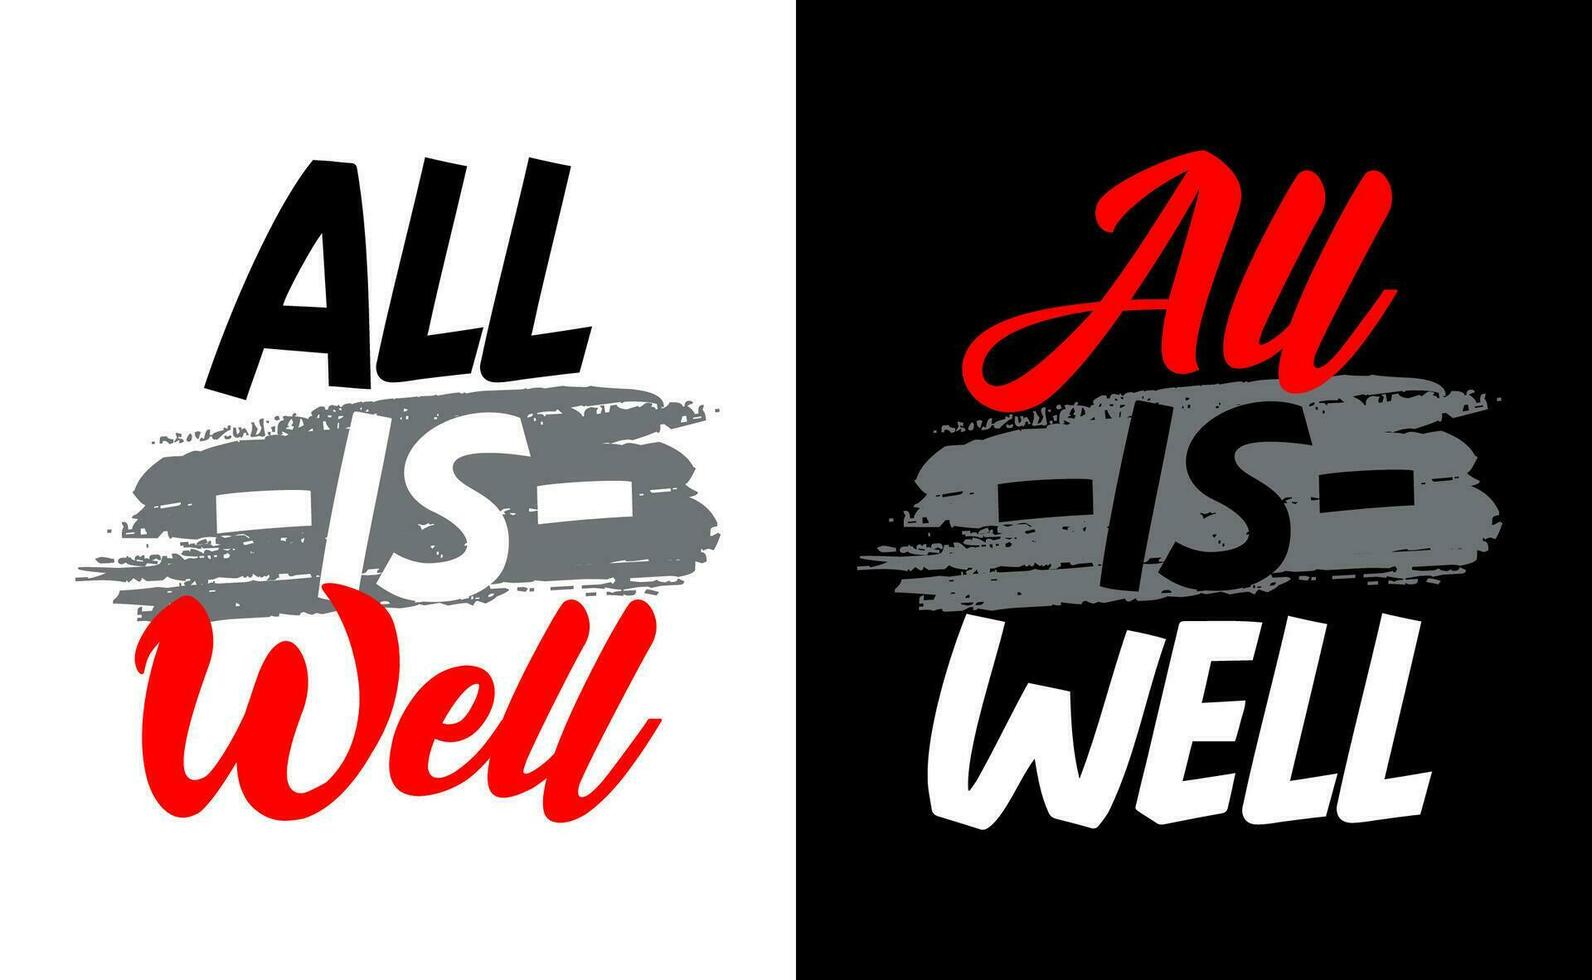 All is well motivational short quotes, motivational quote, brush stroke. banner, poster, etc.  grunge vector design.